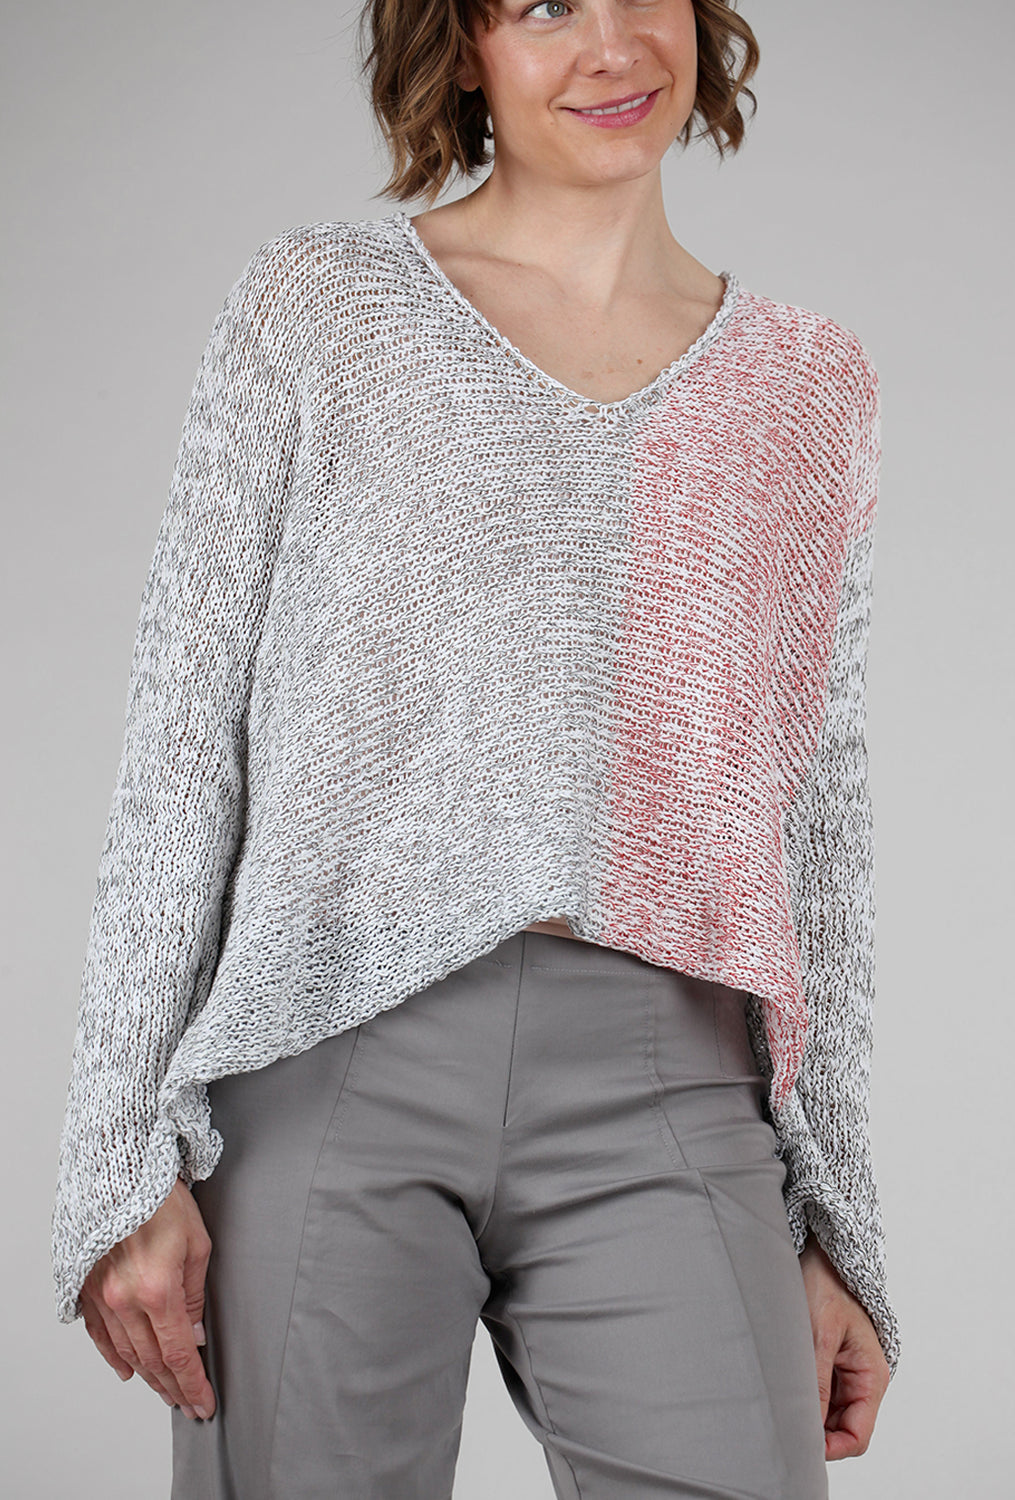 Skif Mixed Knits Vee Pullover, Gray/Red Mix 